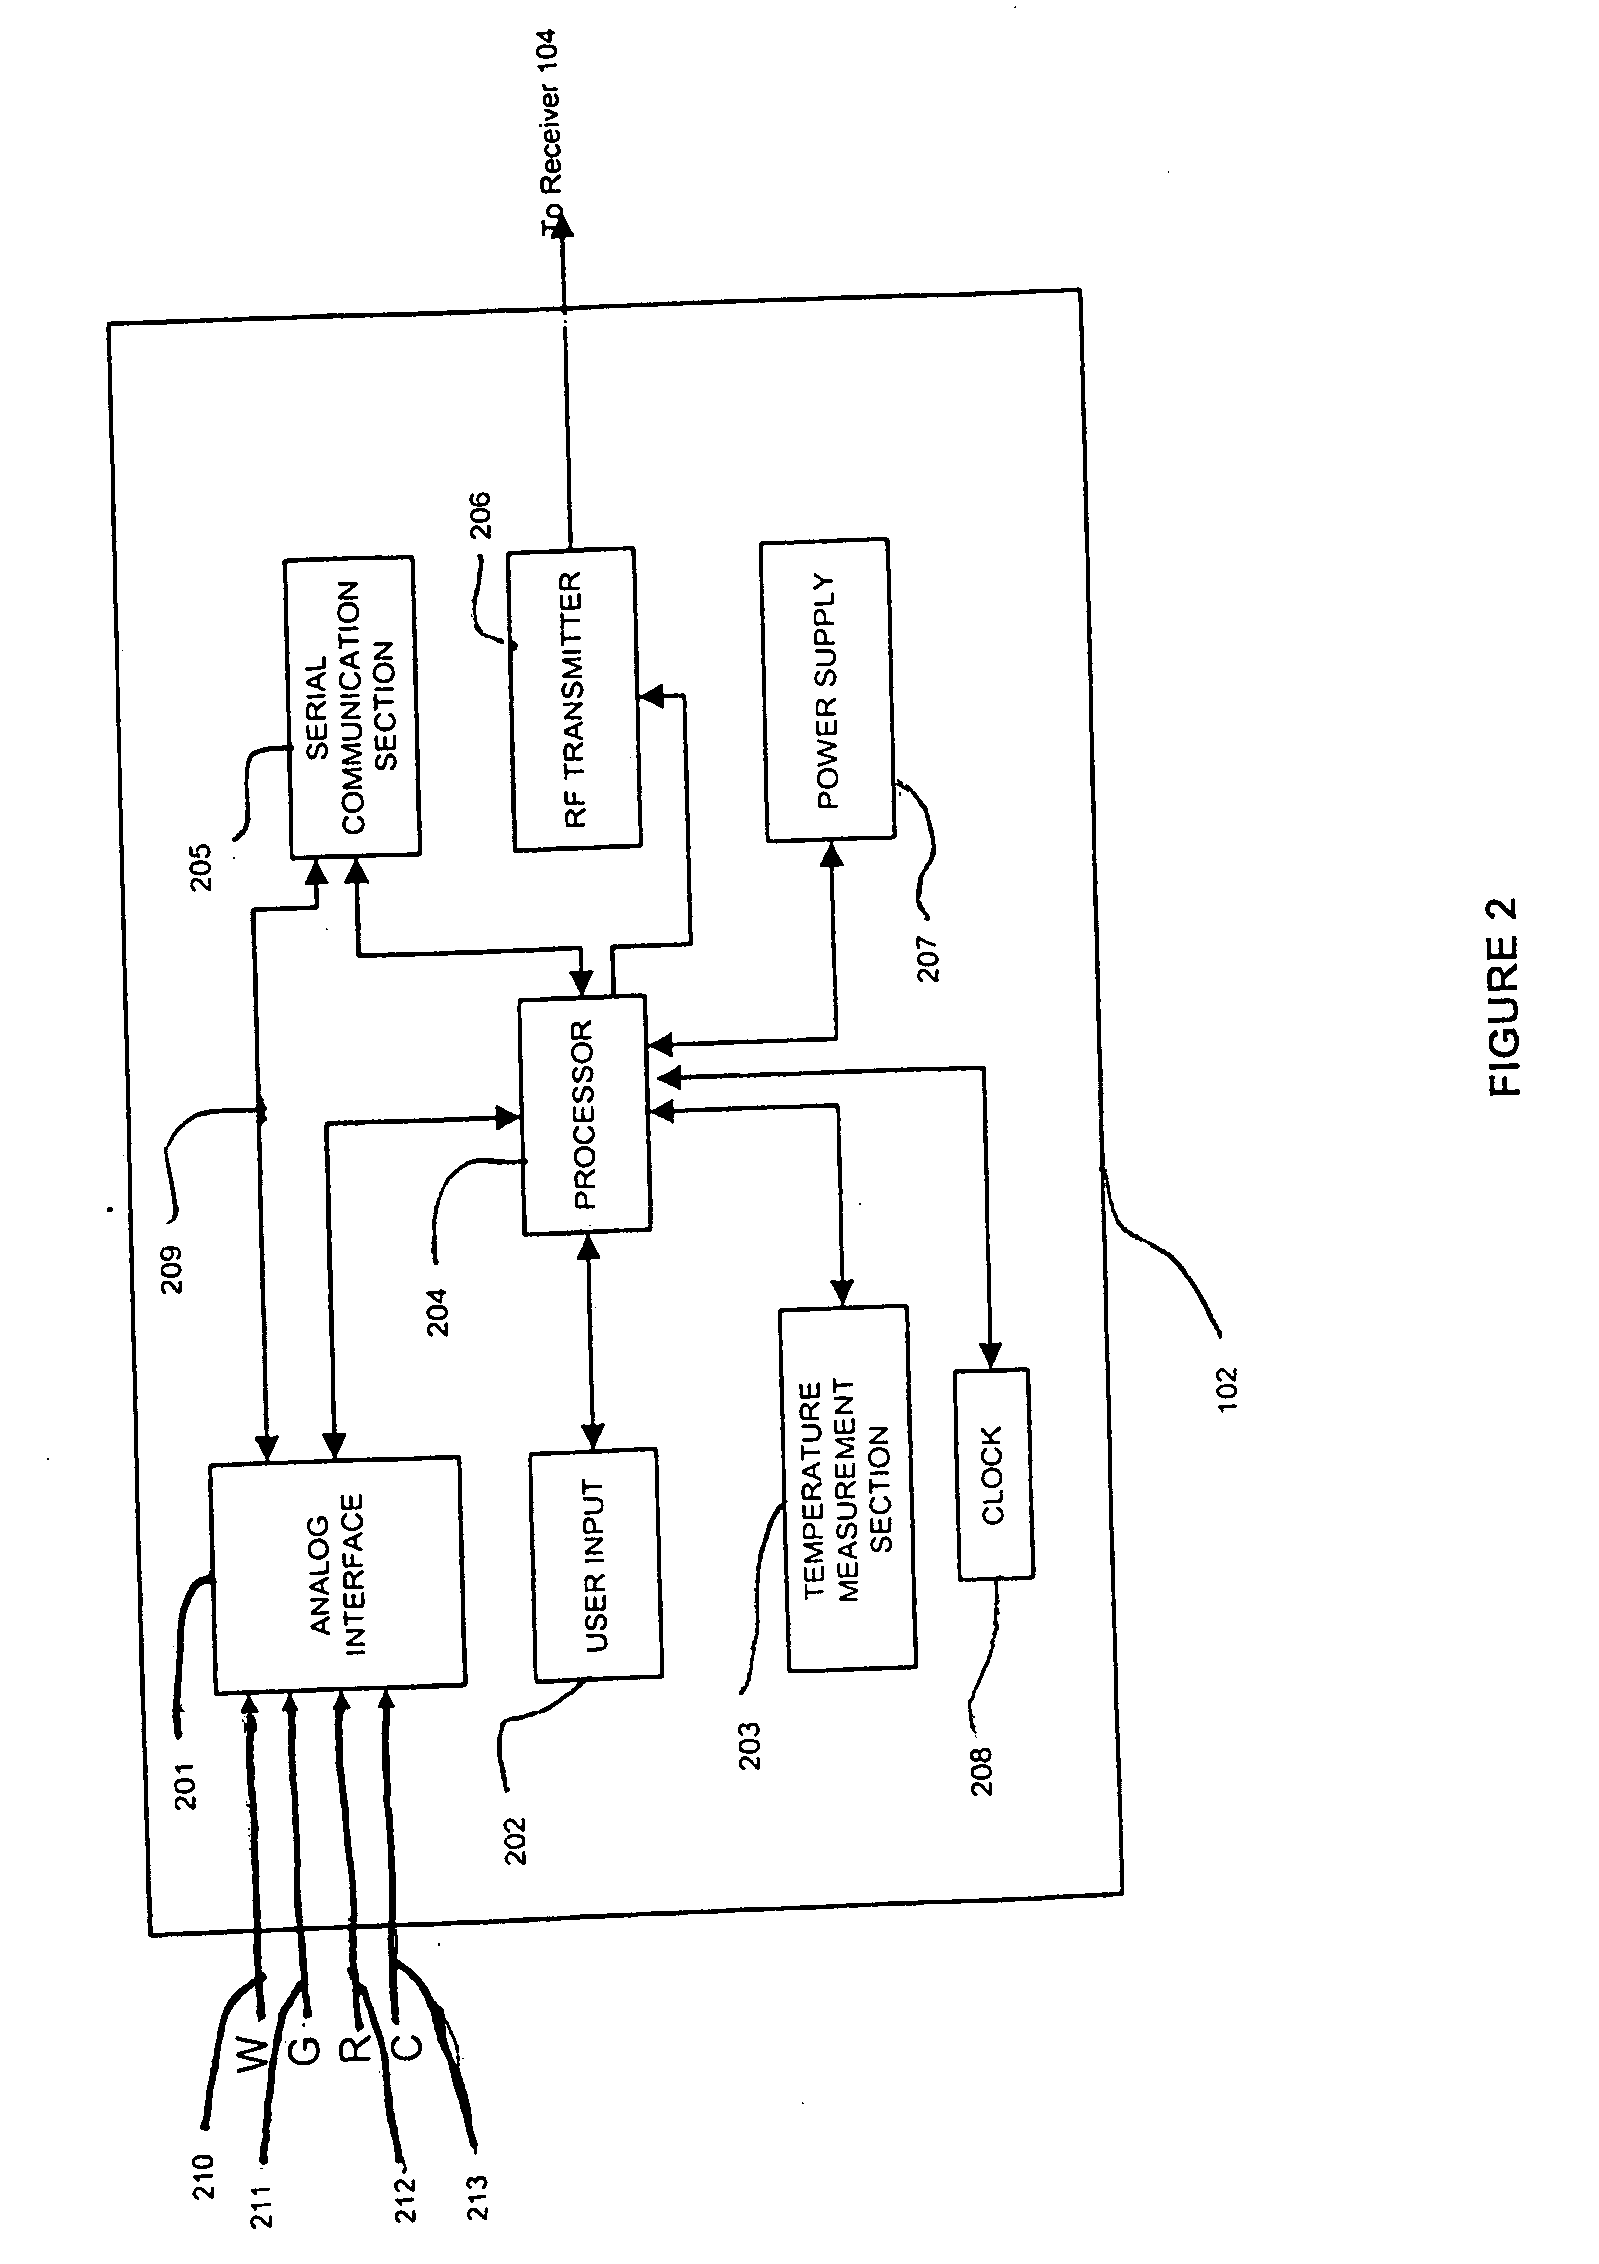 Method and apparatus for providing sensor guard for data monitoring and detection systems